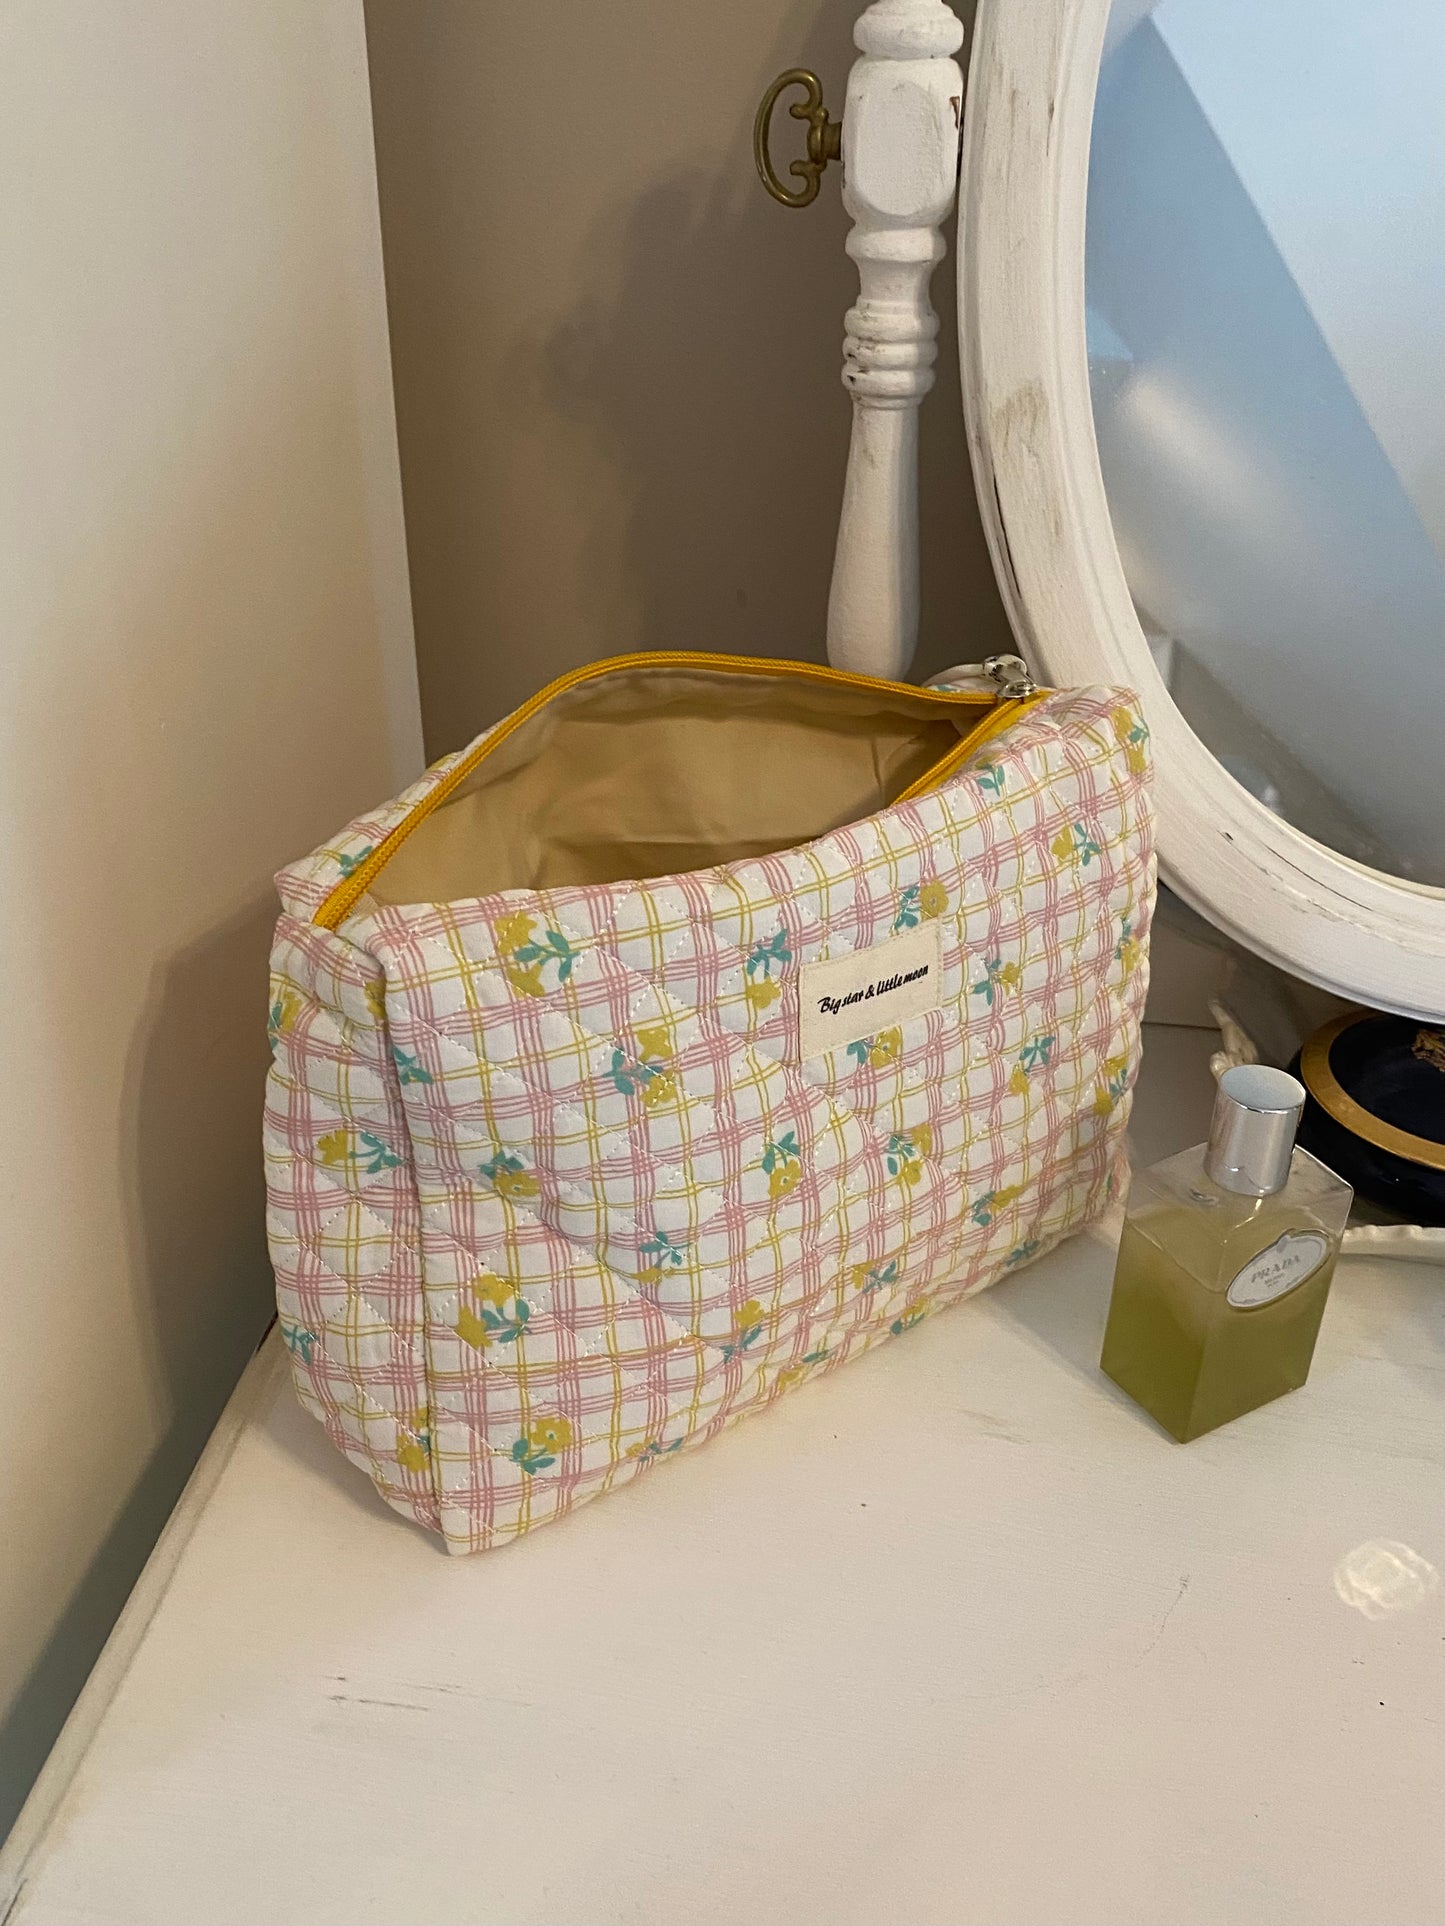 Big Star & Little Moon Quilted Cosmetic Bag